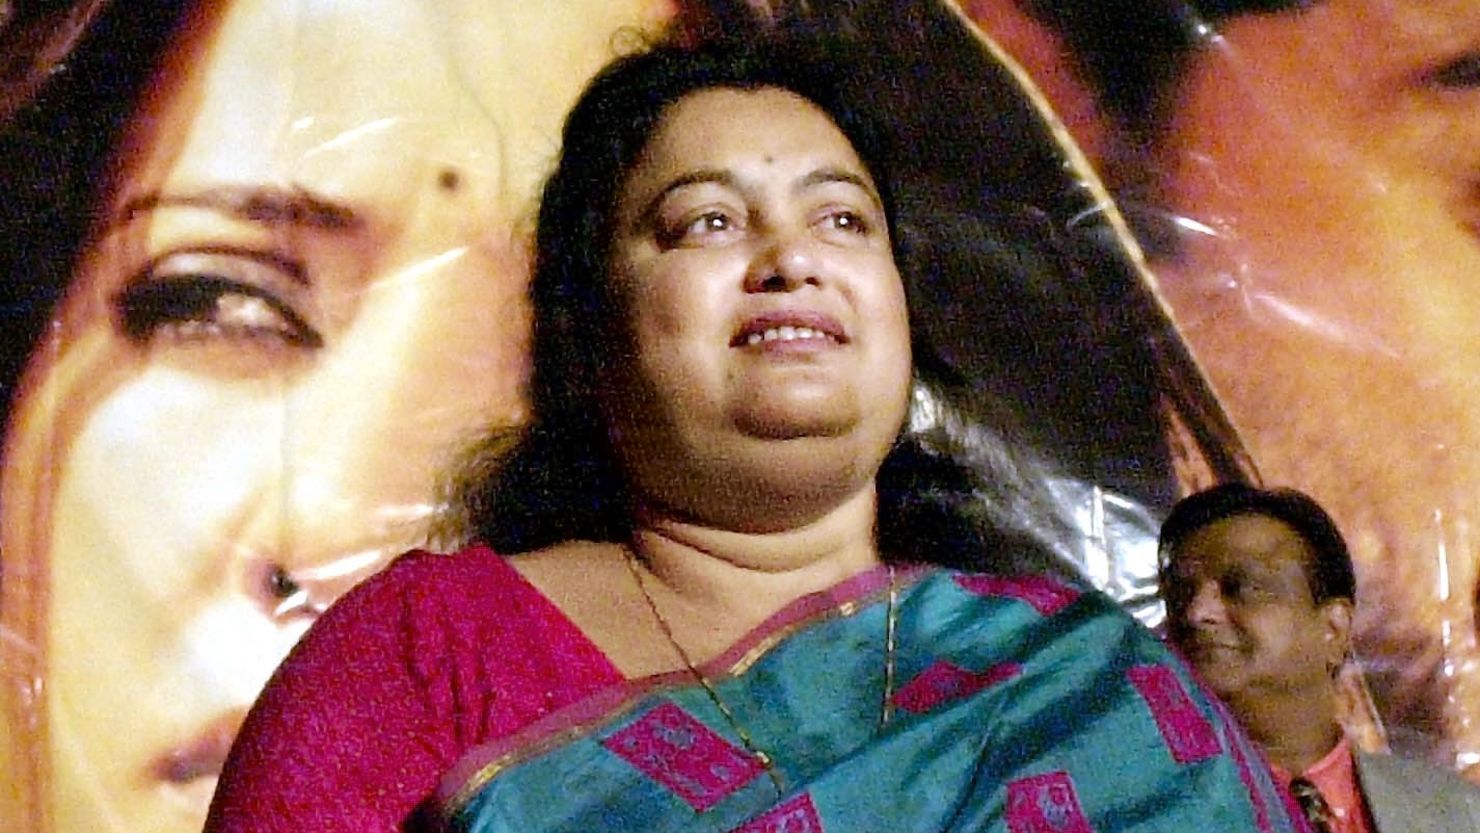 Sushmita Banerjee at a news conference in 2002, announcing a film based on her life story, "Escape from Taliban."